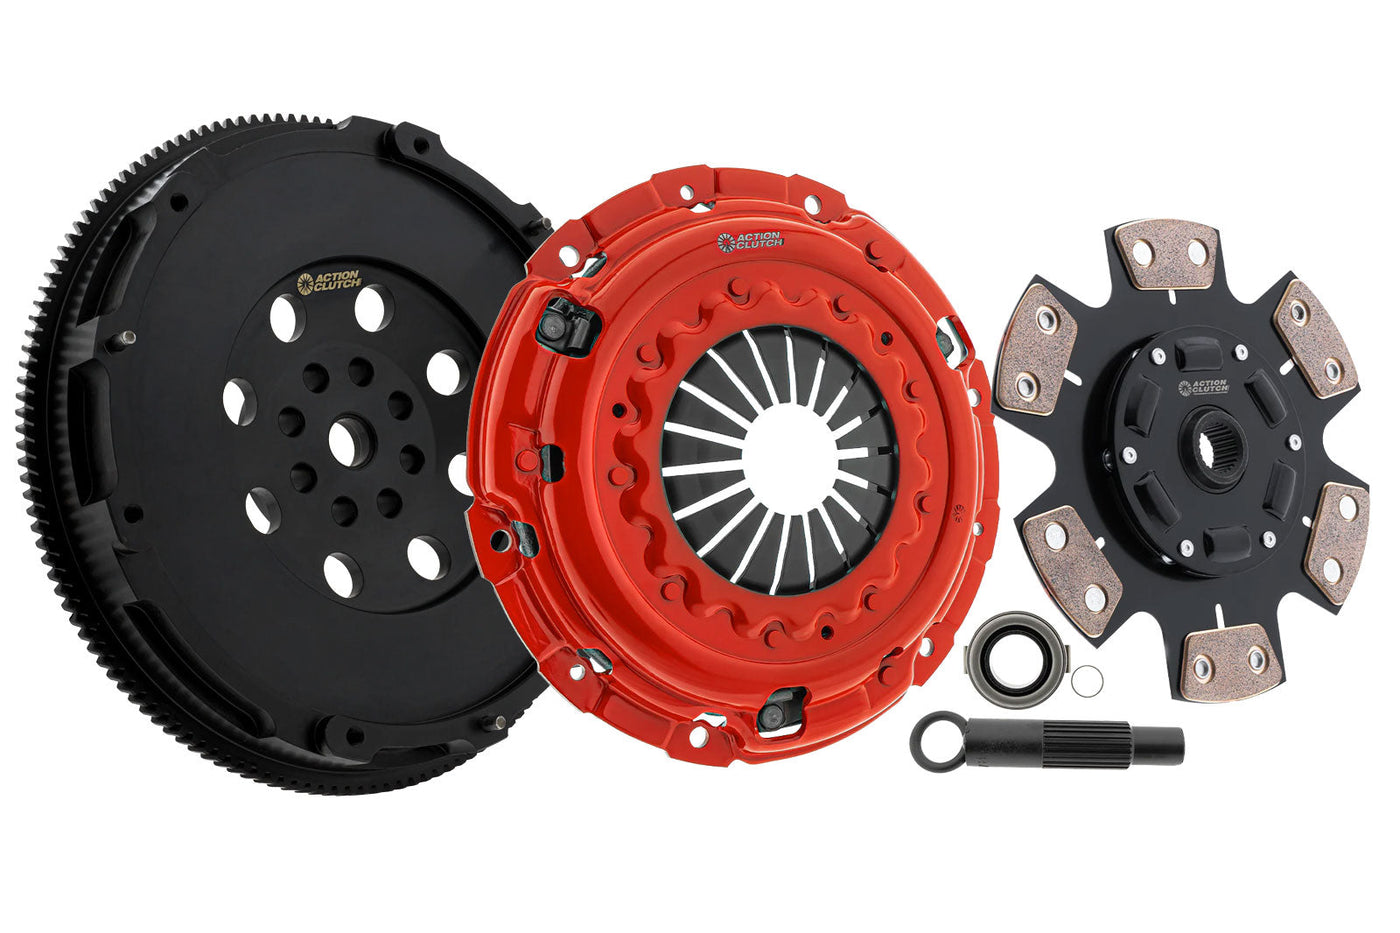 Stage 3 Clutch Kit (1MS) for Honda Civic SI 2022 1.5L (L15B7) Turbo Includes Chromoly Lightweight Flywheel